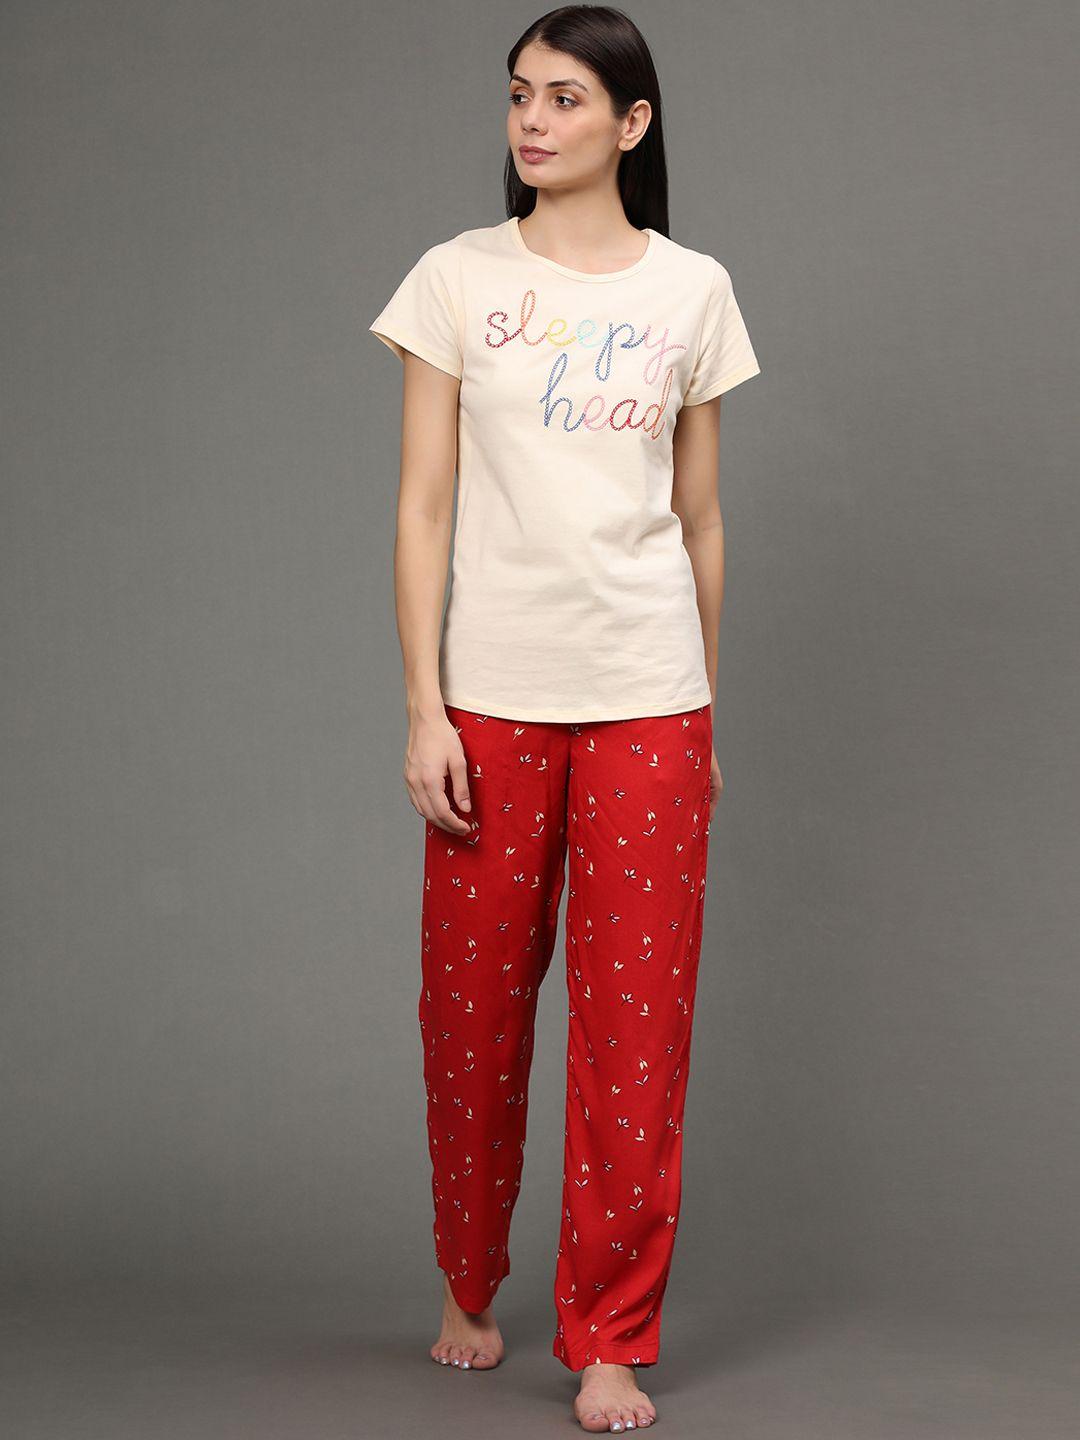 bstories women cream-coloured & red printed night suit